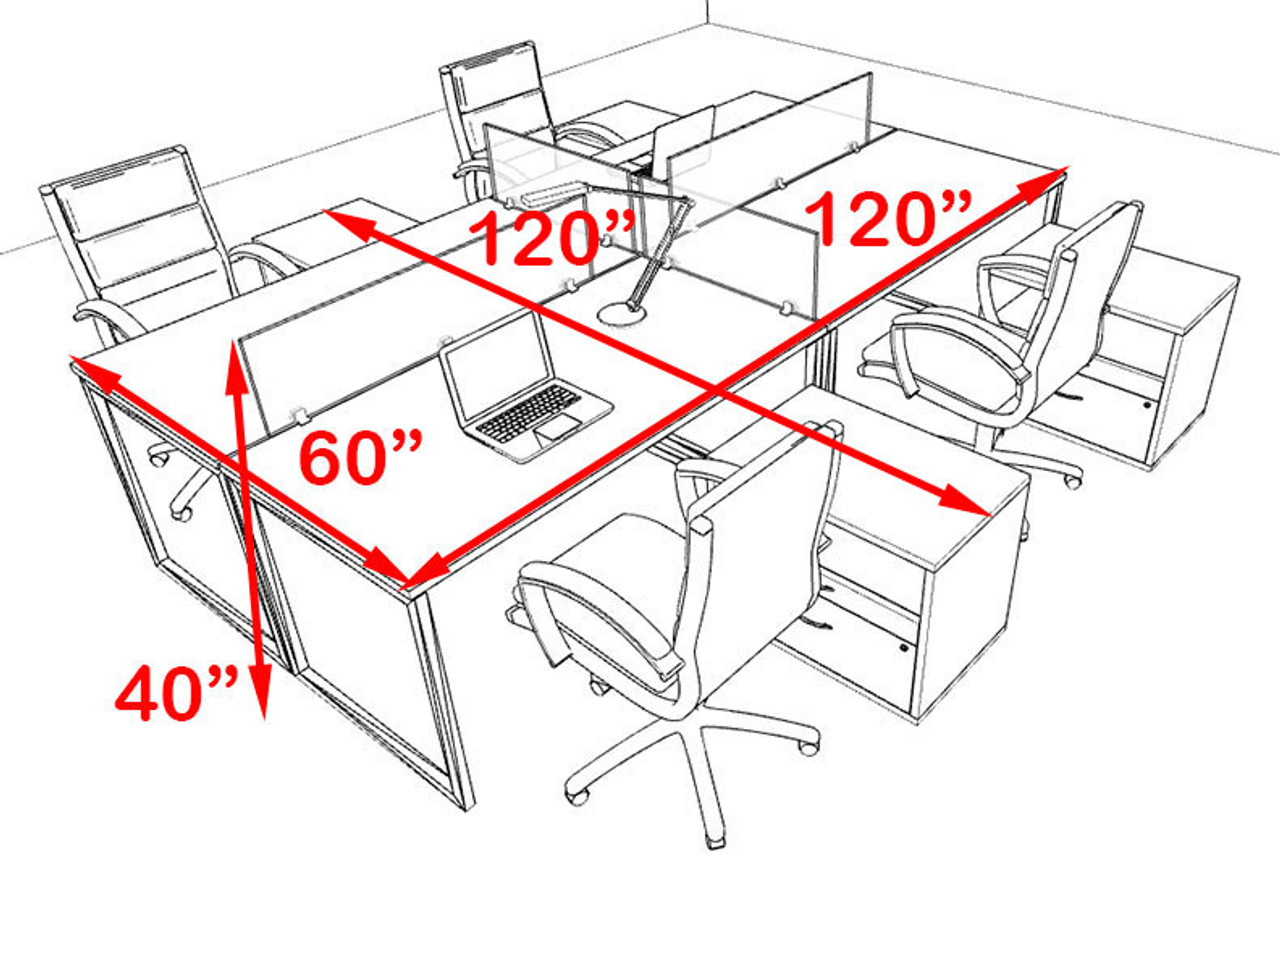 Four Person Modern Acrylic Divider Office Workstation, #AL-OPN-FP61